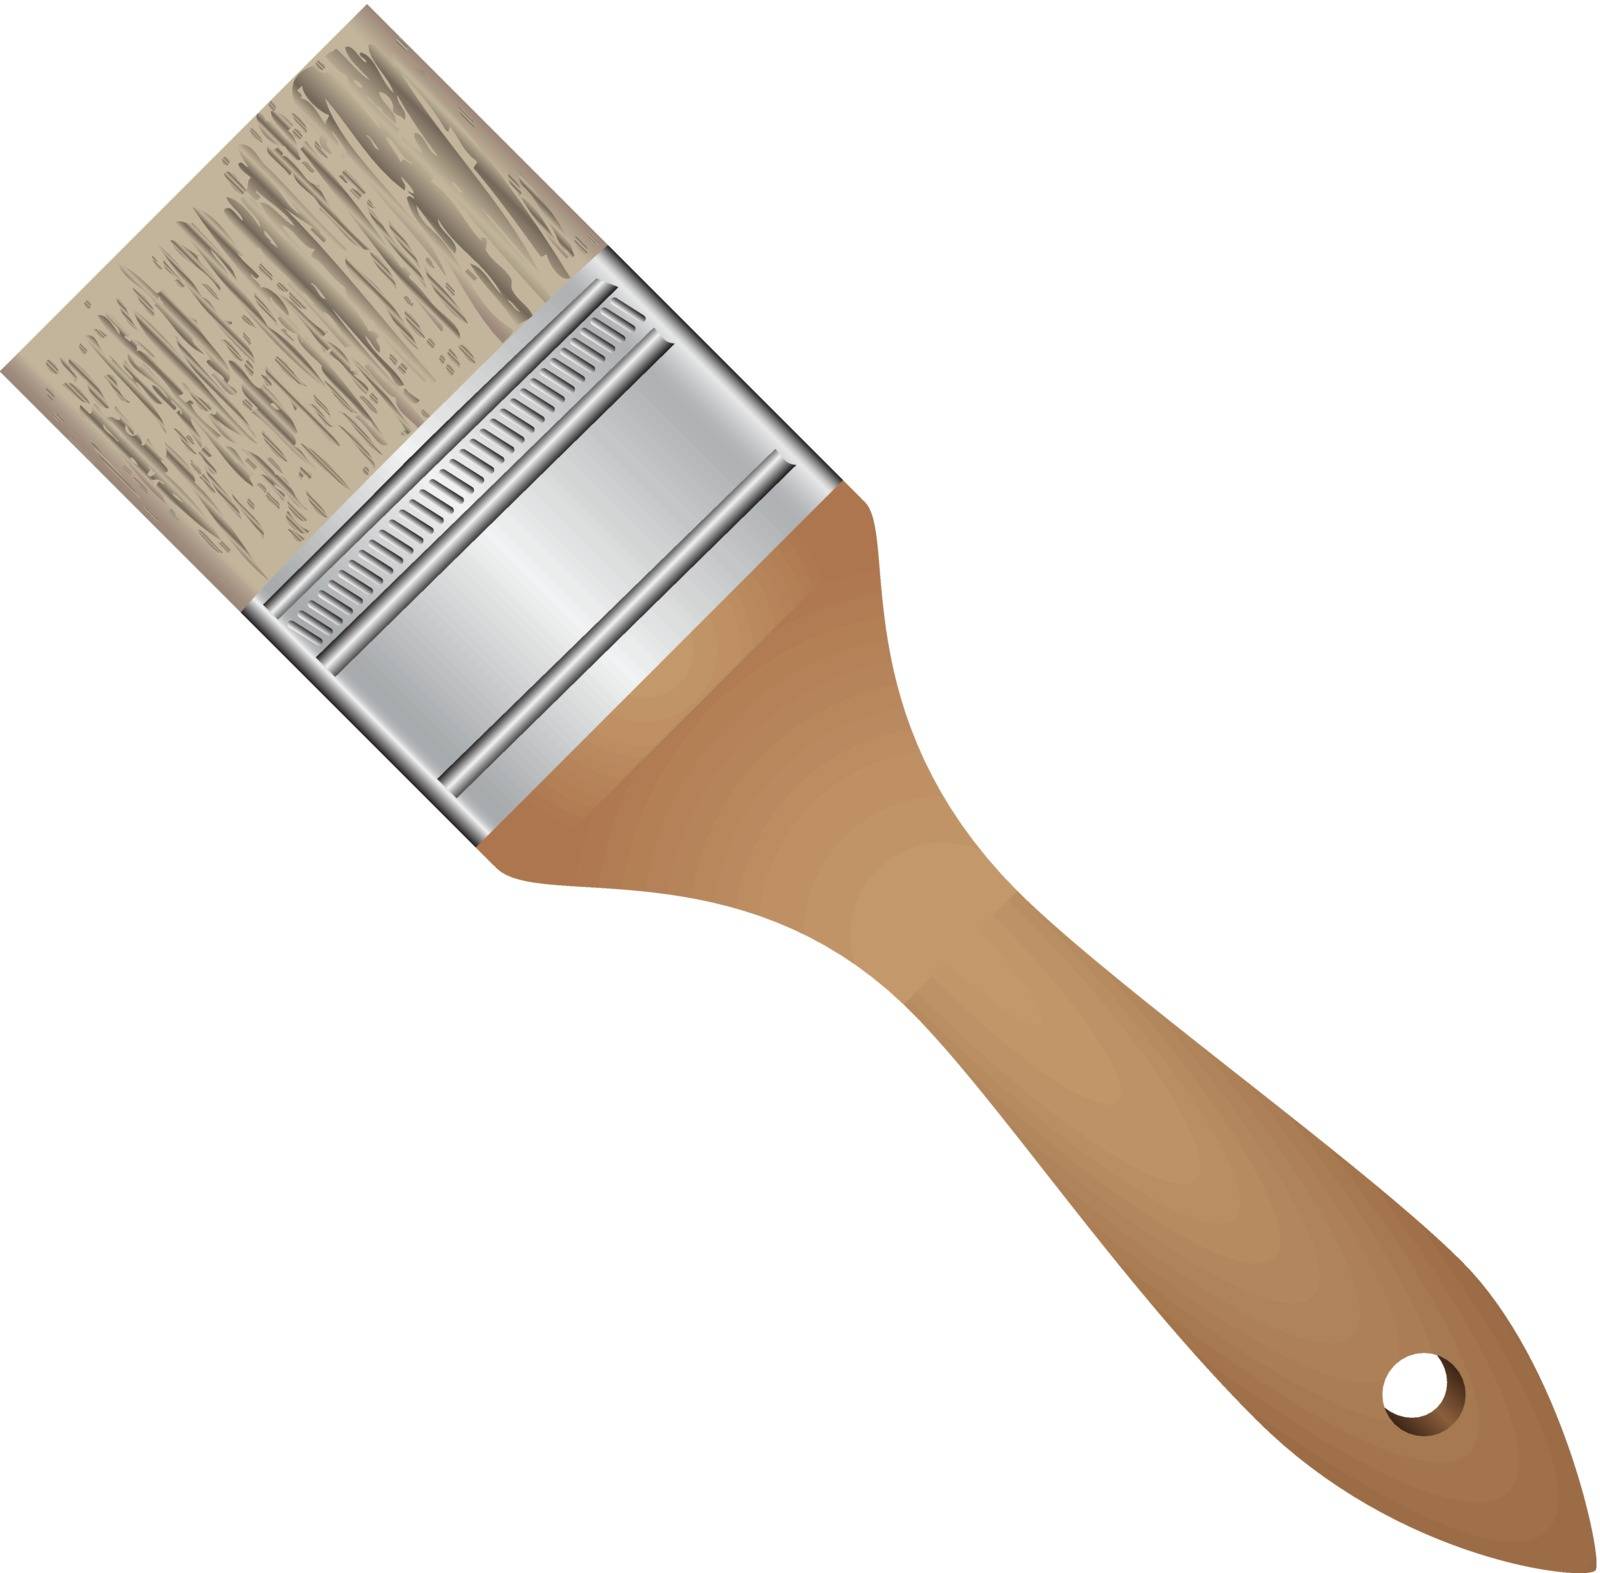 Wide brush for painting work. Vector illustration.